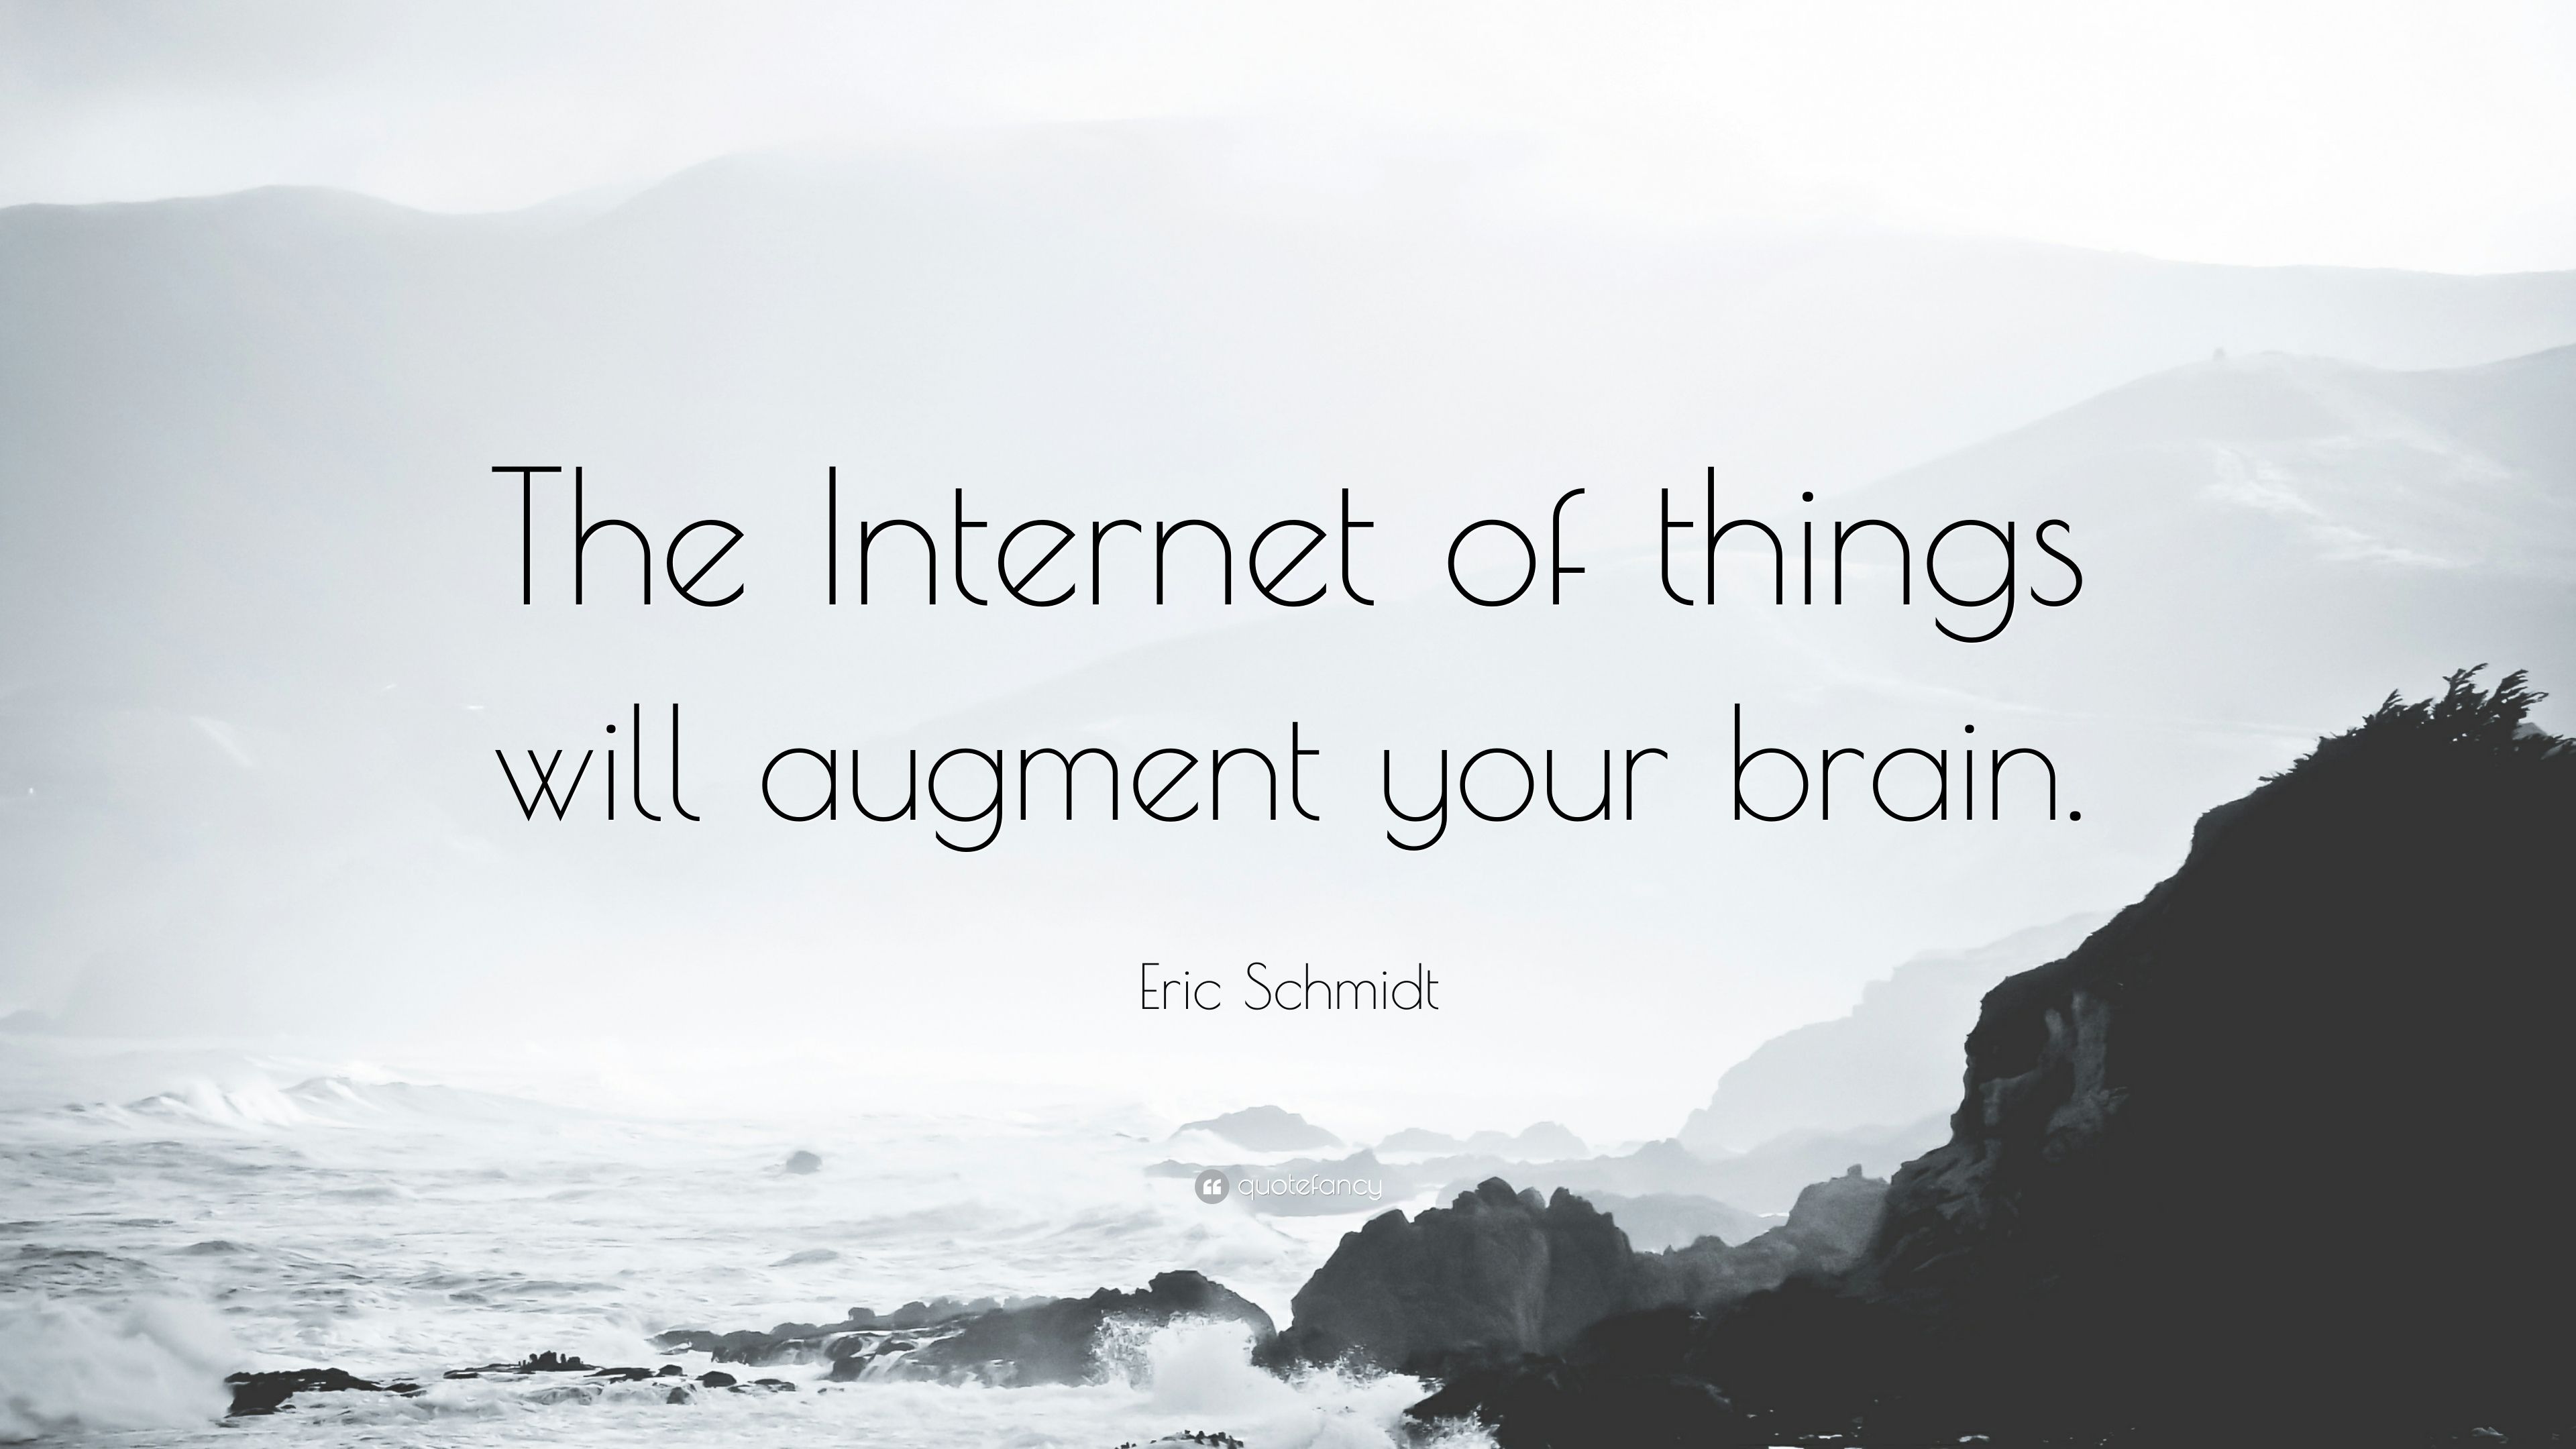 Eric Schmidt Quote: “The Internet of things will augment your